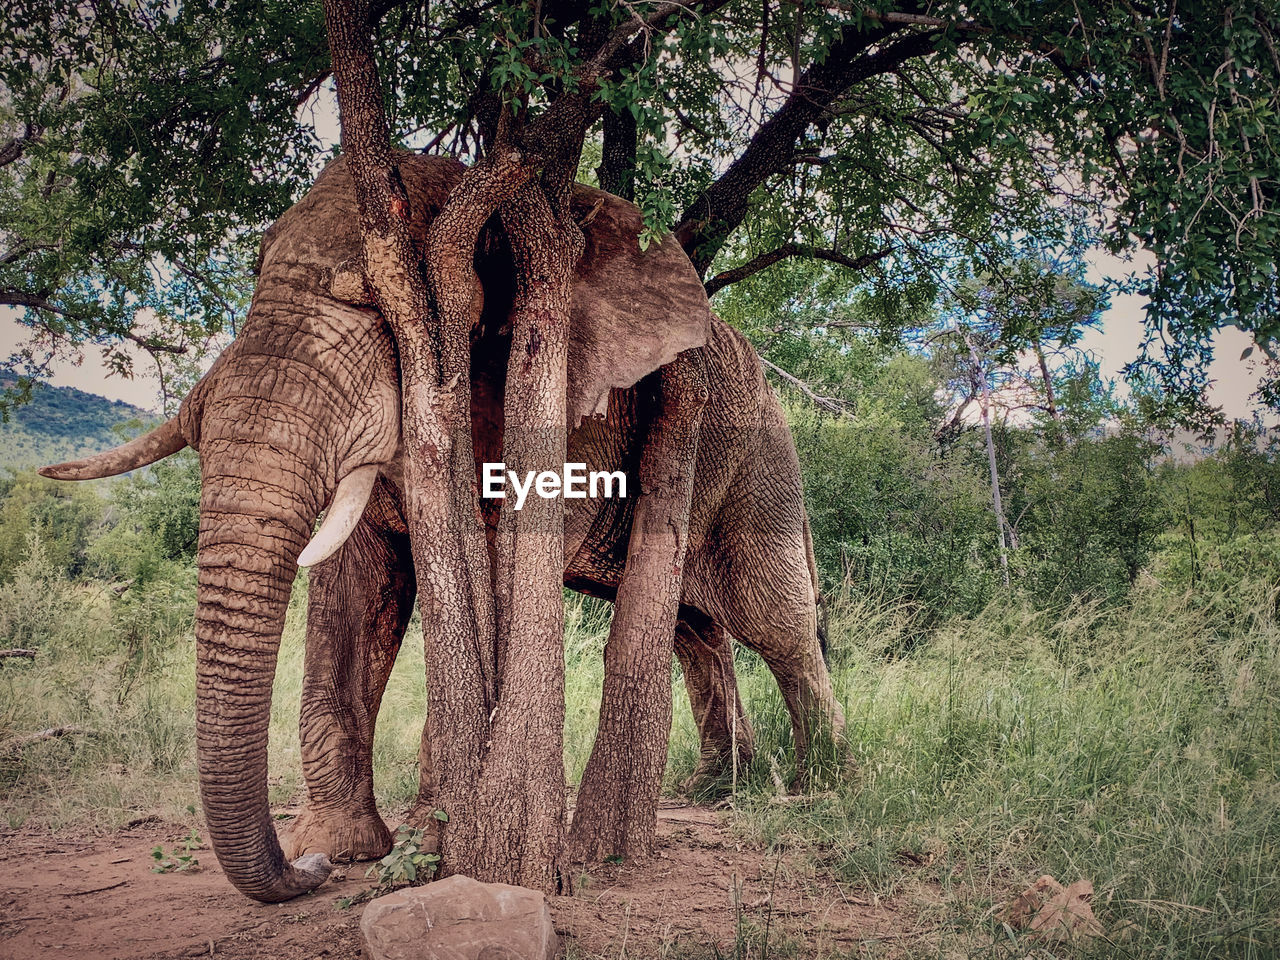 animal themes, animal, tree, elephant, wildlife, indian elephant, plant, mammal, animal wildlife, savanna, safari, no people, nature, animal body part, african elephant, one animal, jungle, trunk, day, land, animal trunk, outdoors, tusk, adventure, forest, tree trunk, environment, field, zoo